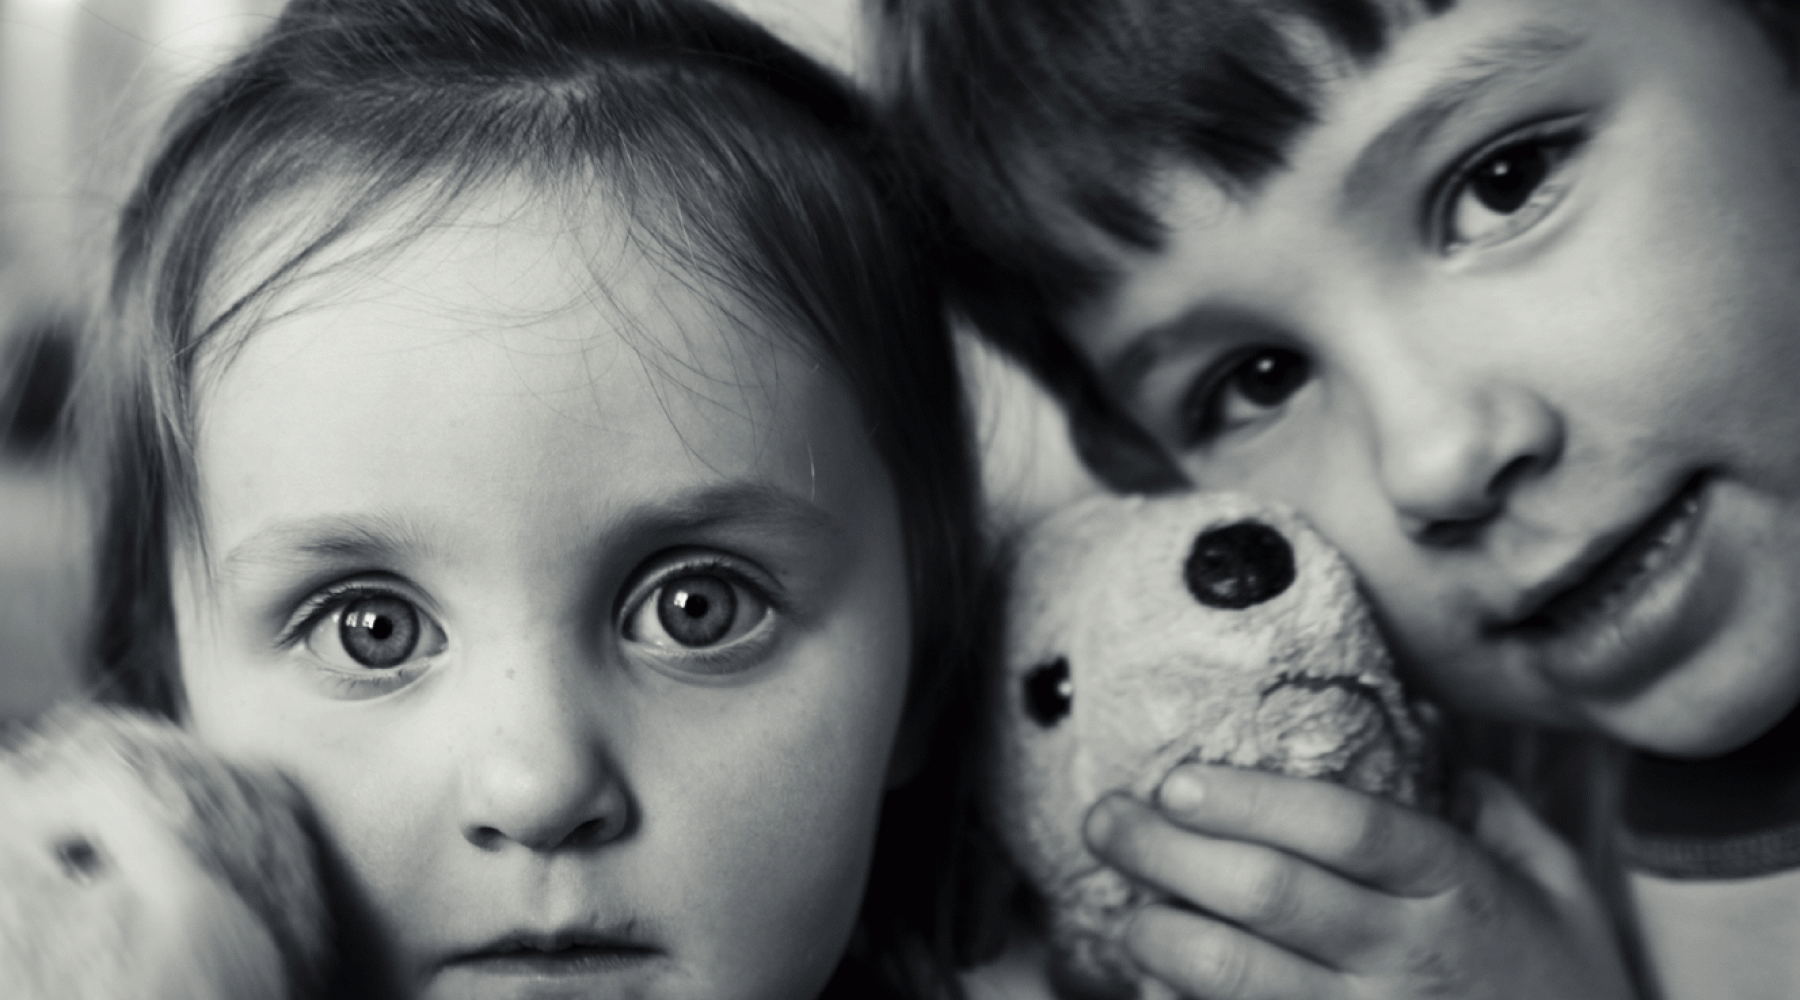 Boy and Girl with their stuffed toys.